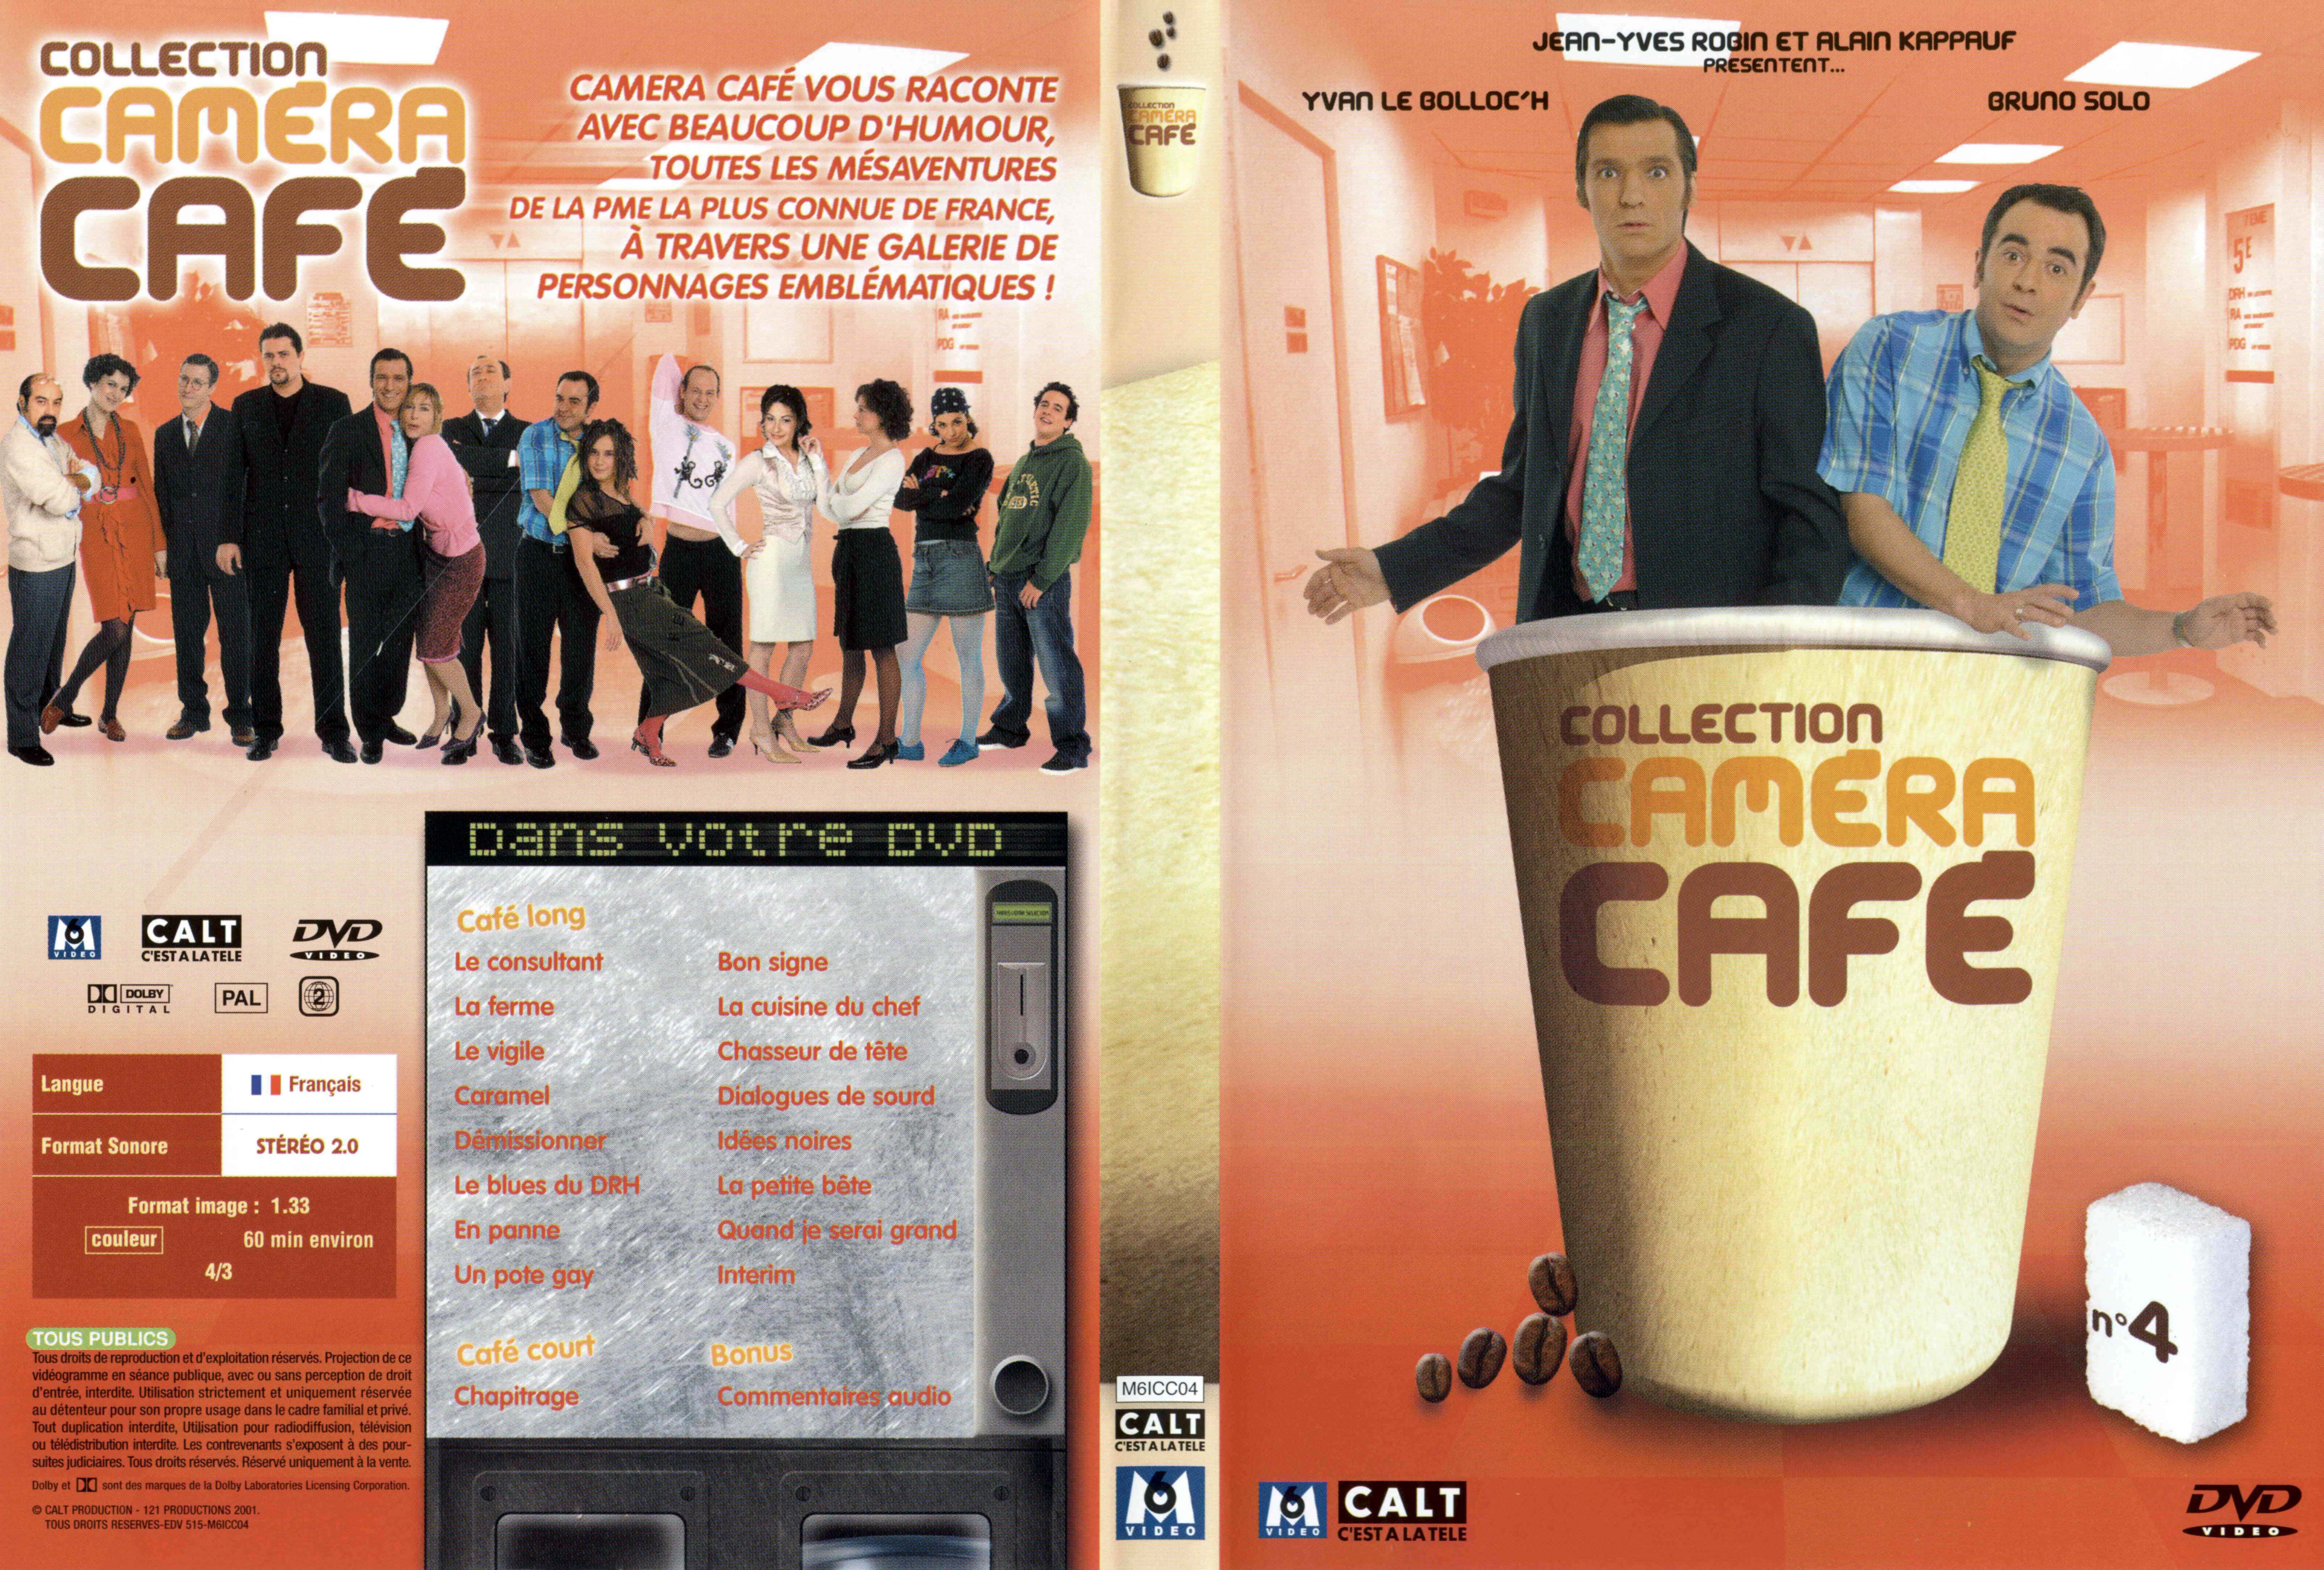 Jaquette DVD Collection Camera Cafe vol 04